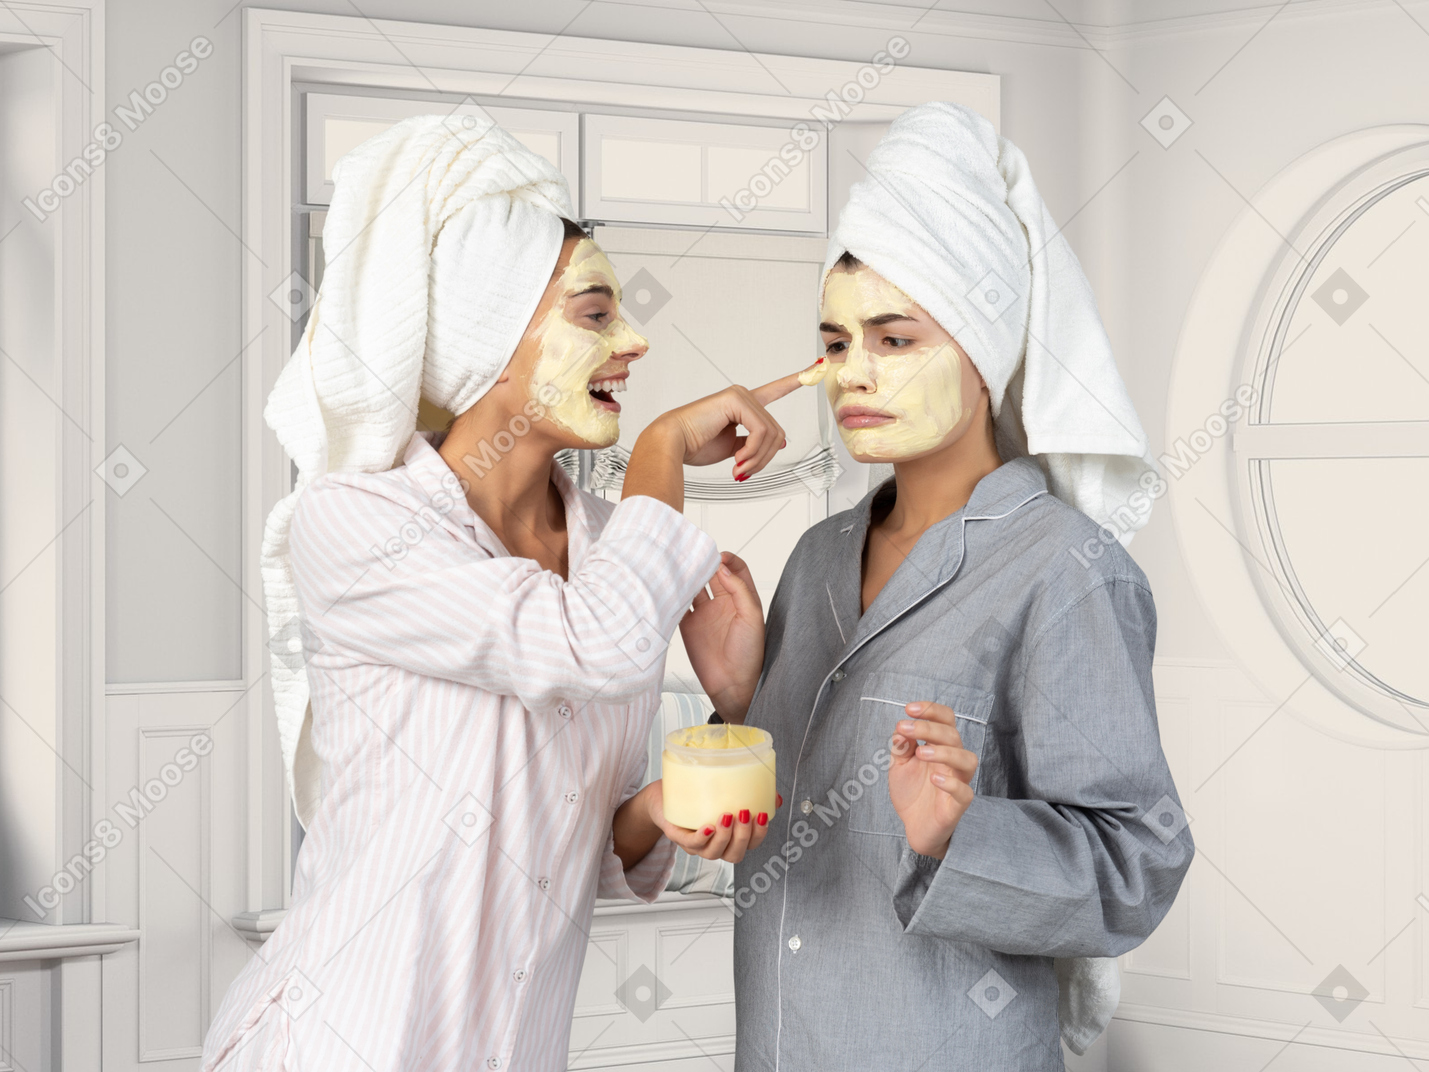 A young woman applying skin care face mask on another woman